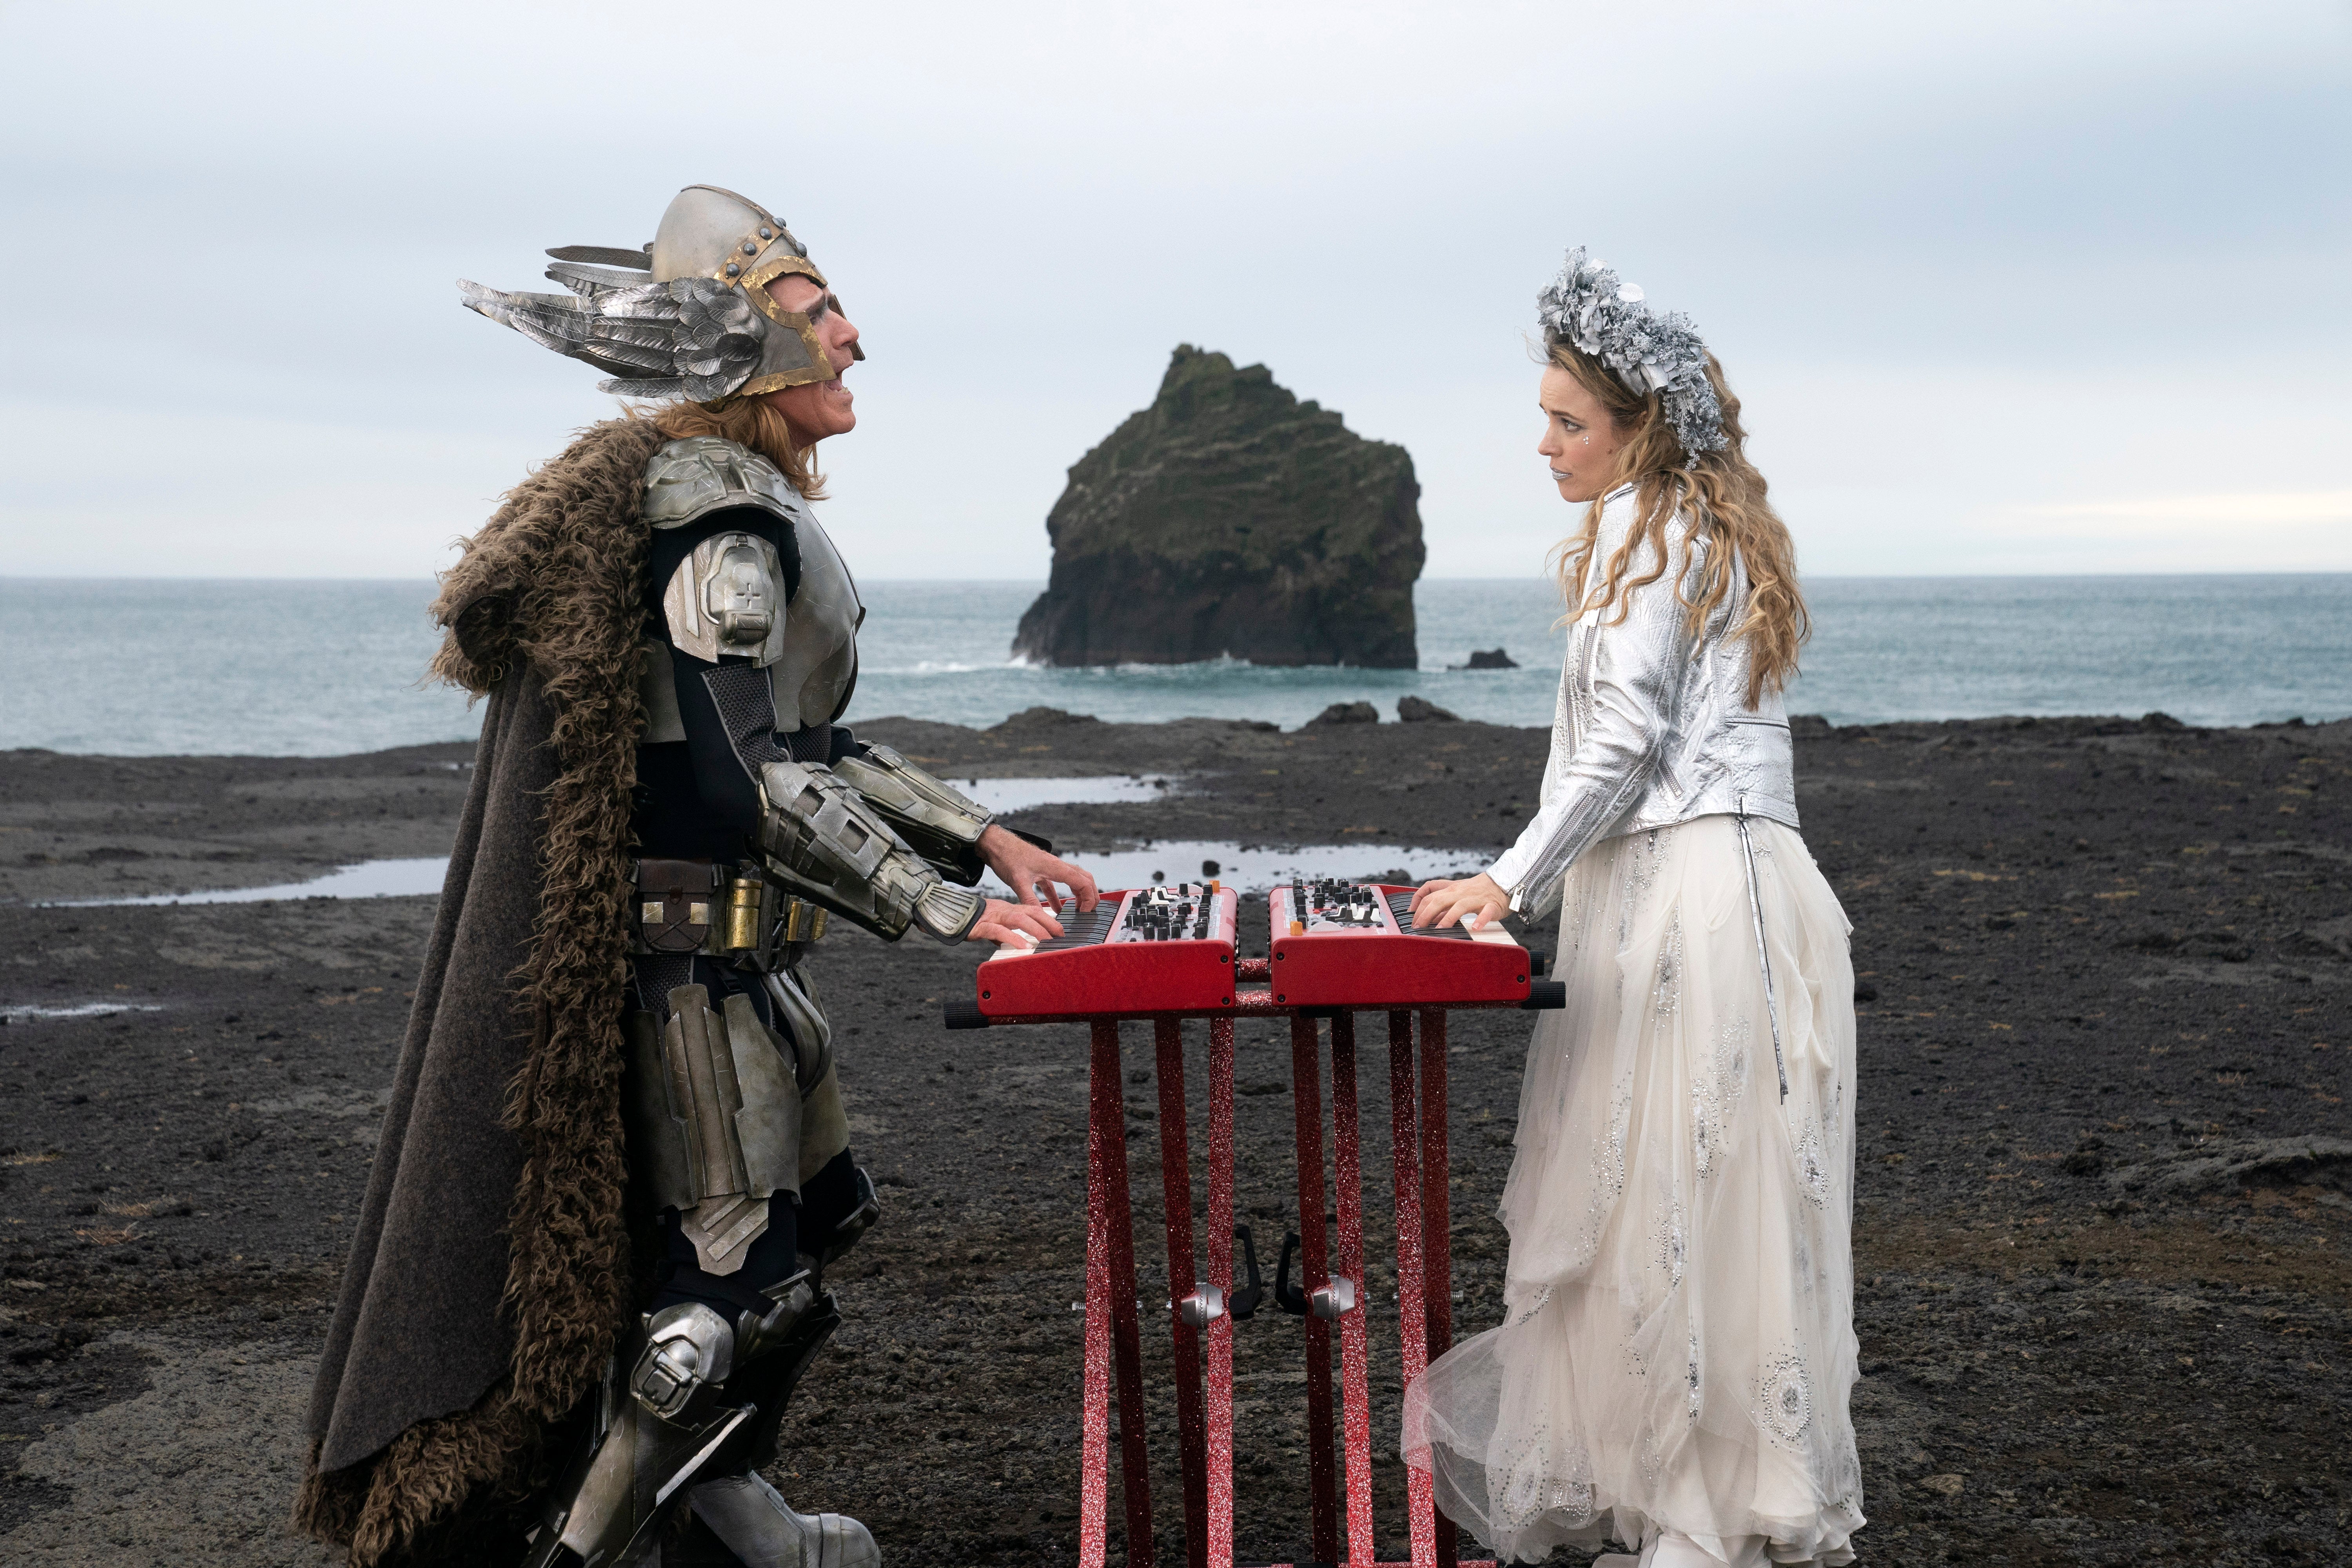 Will Ferrell, in Viking helmet, and Rachel McAdams, in jeweled tiara, play keyboards on the rocks by the ocean.